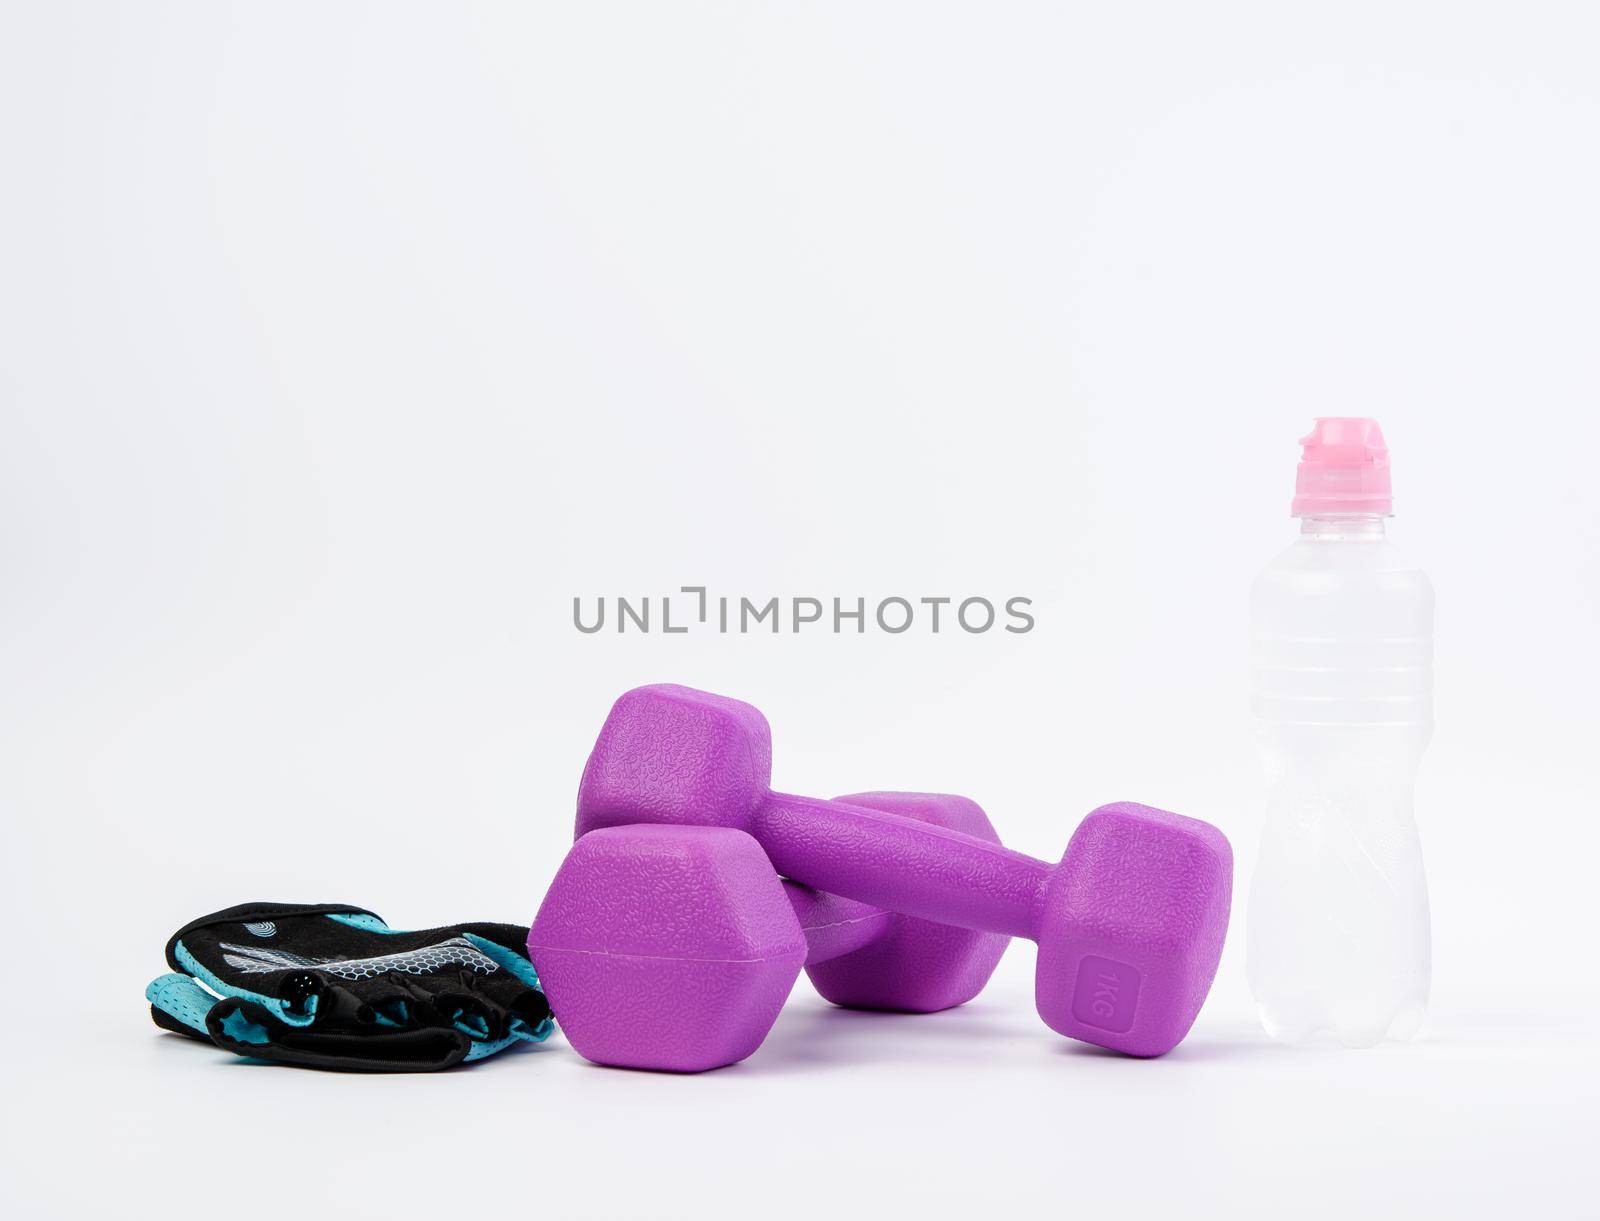 blue sports gloves, pair of purple dumbbells and and bottle of water on a white background, healthy lifestyle